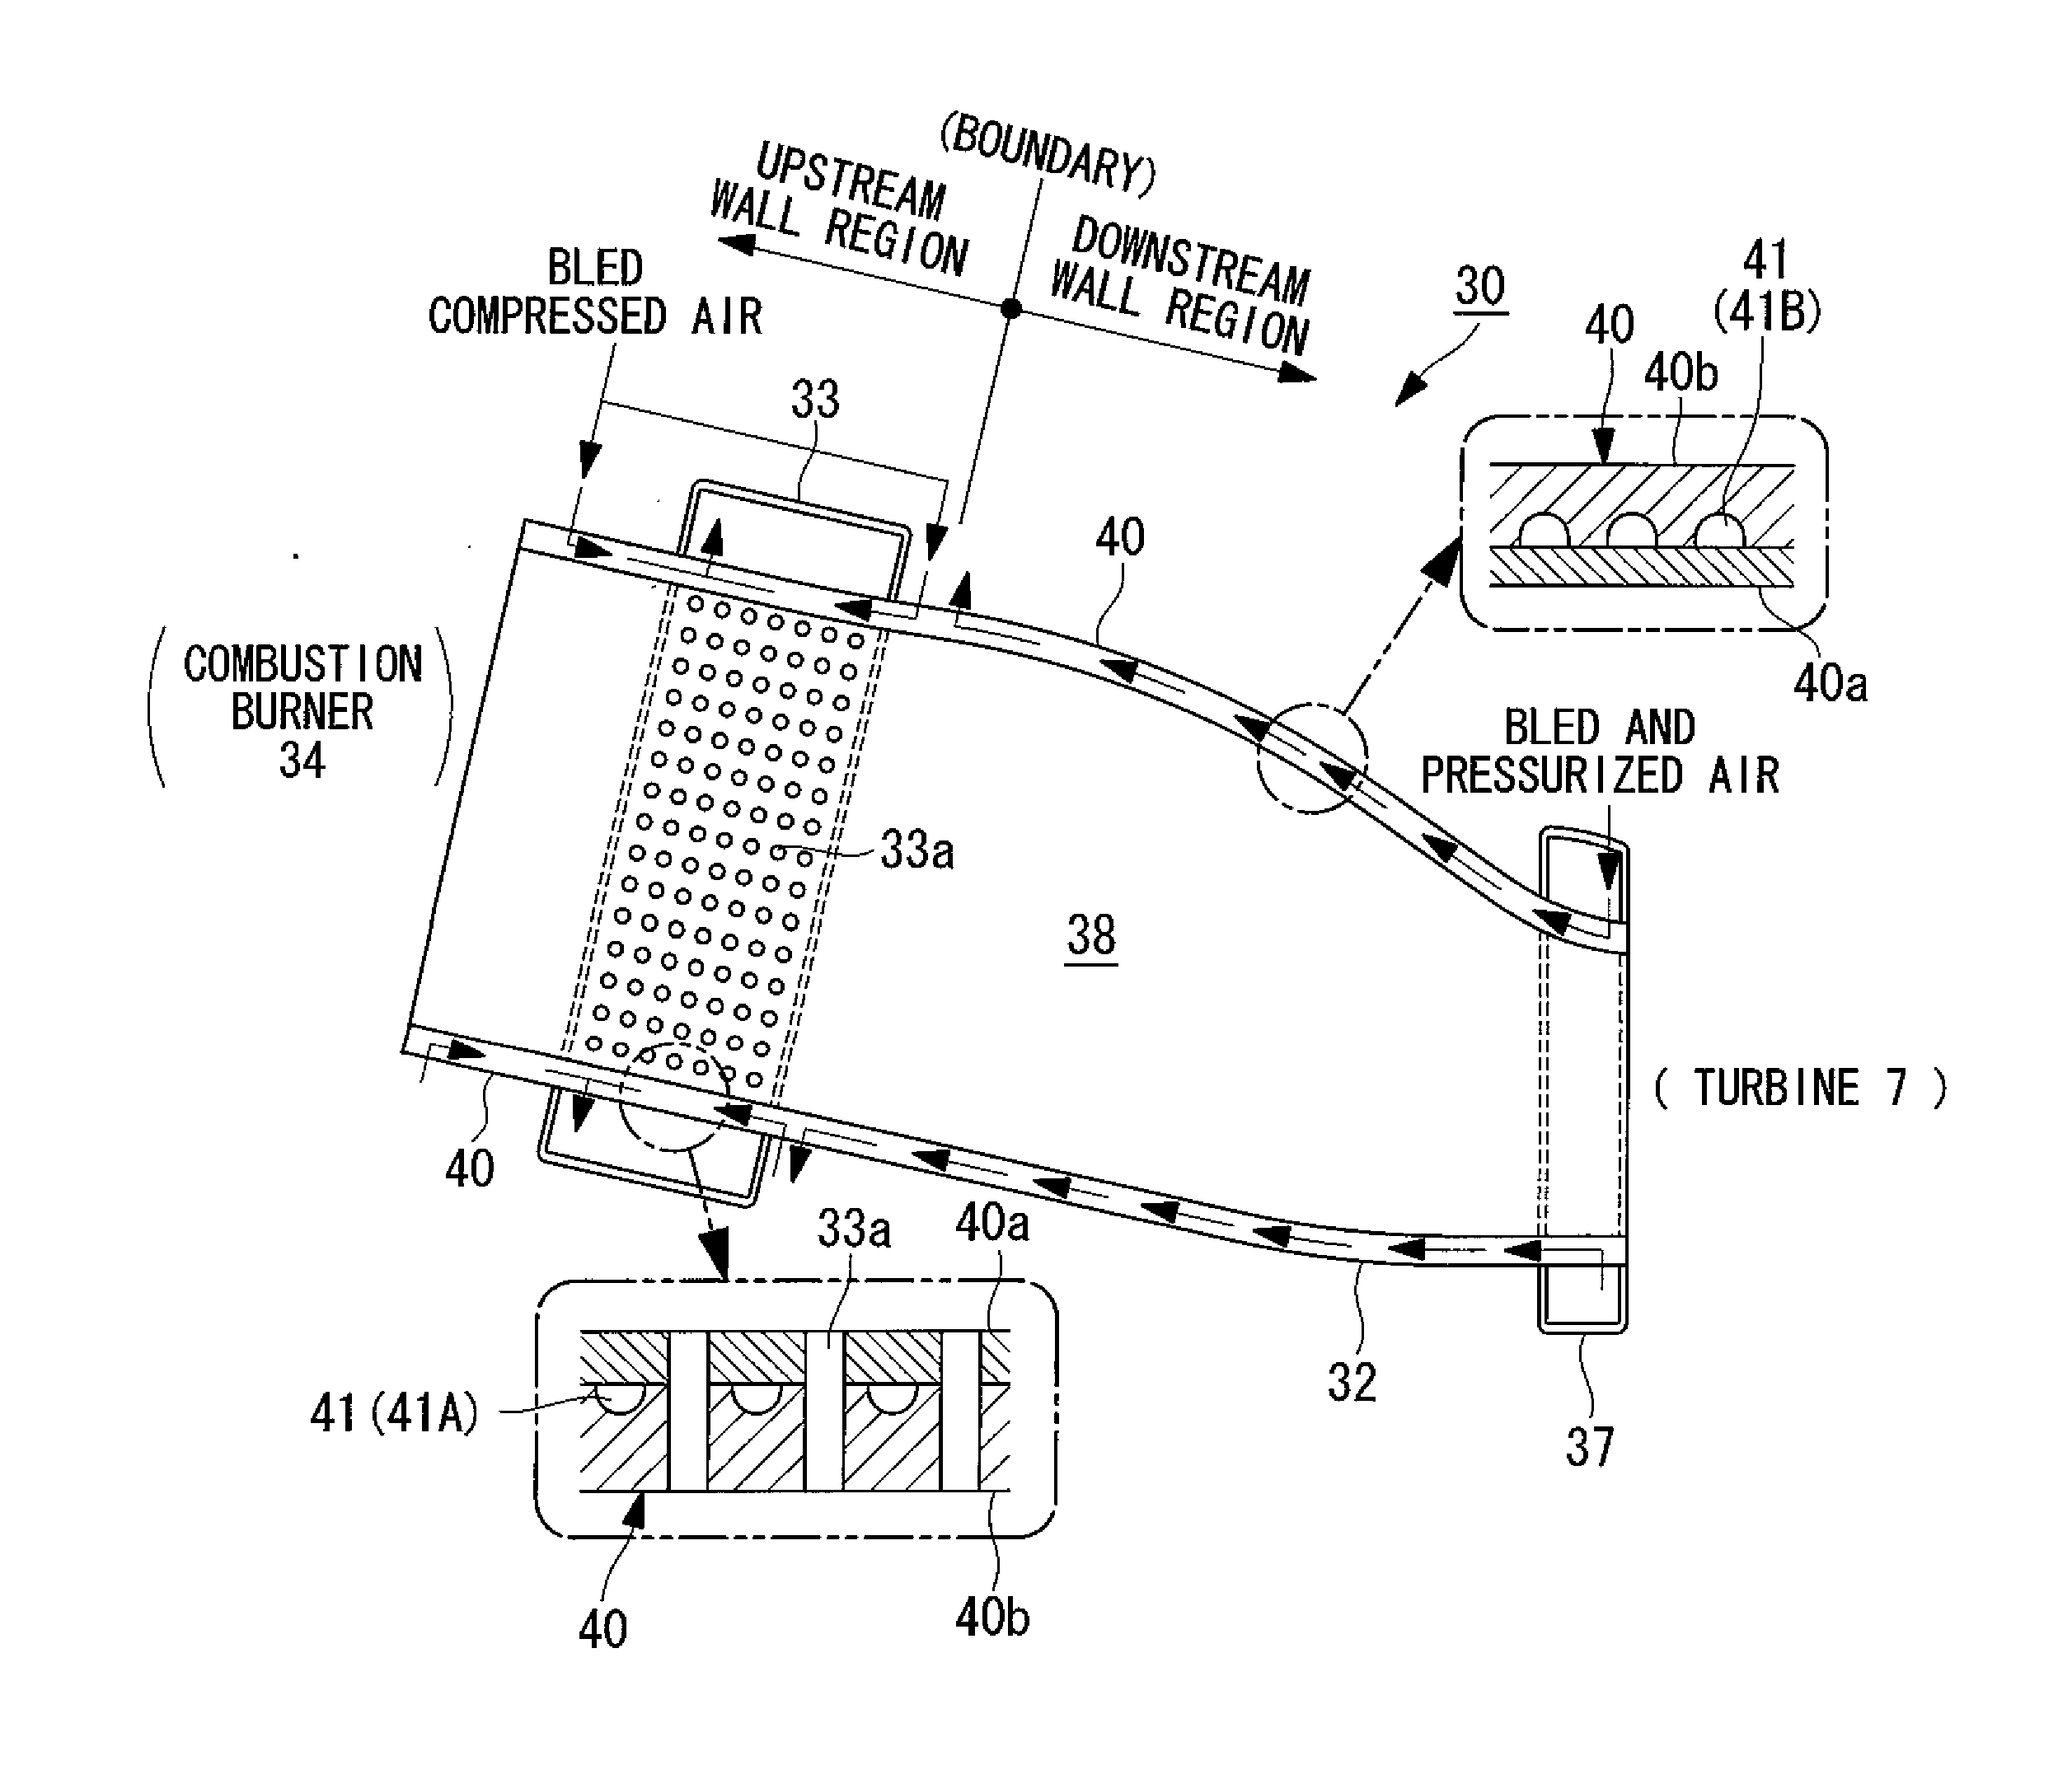 Coolng structure for recovery-type air-cooled gas turbine combustor